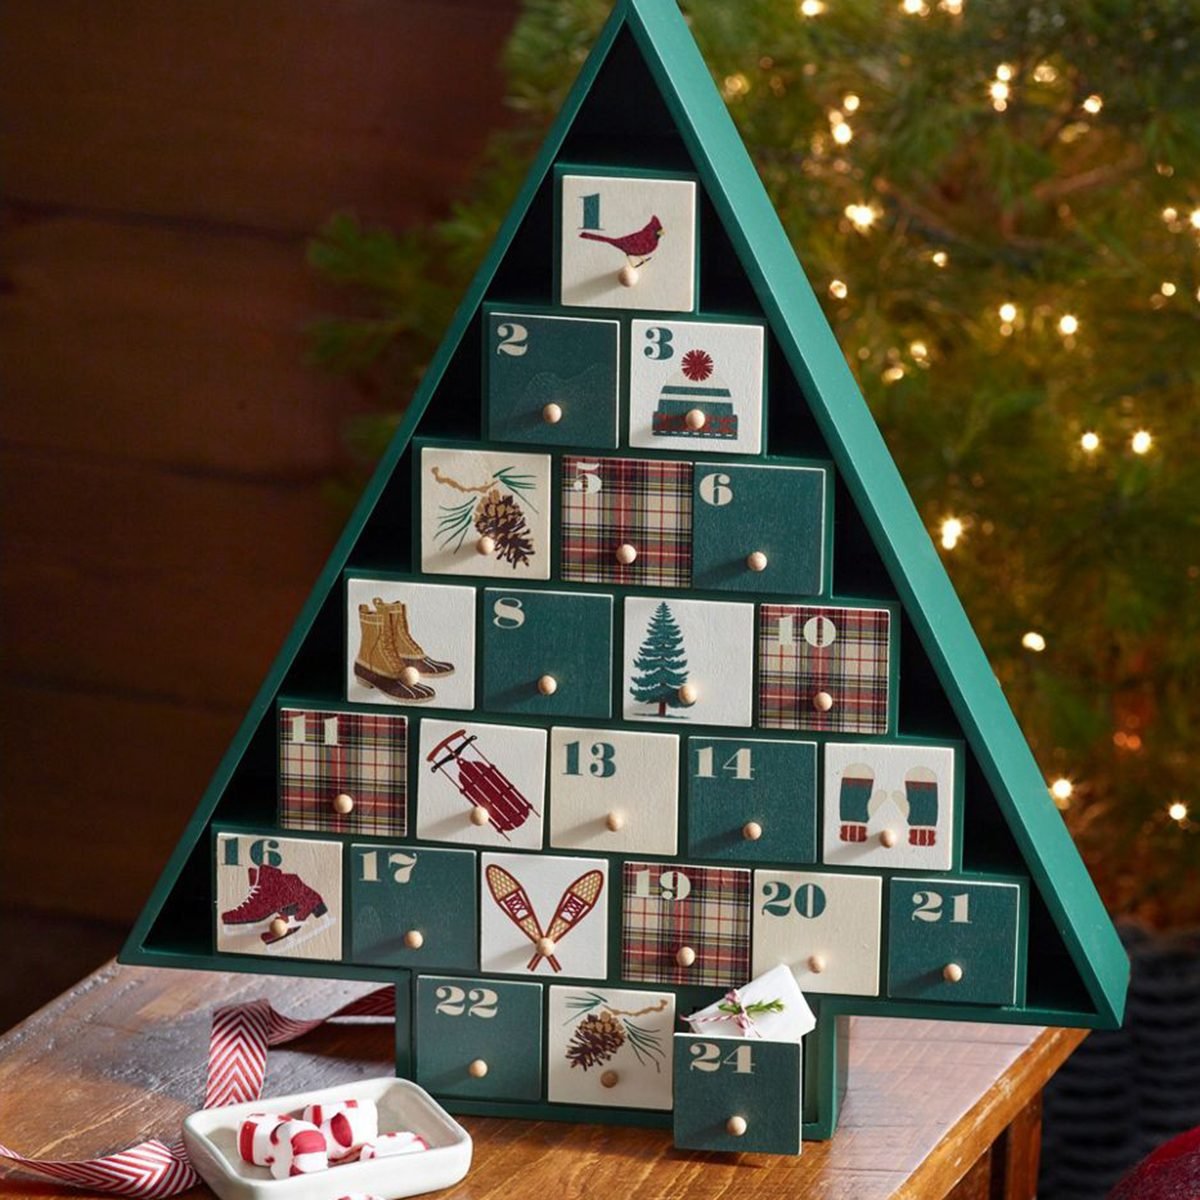 Fillable Advent Calendar, Countdown Calendar With 24 Pockets To Fill